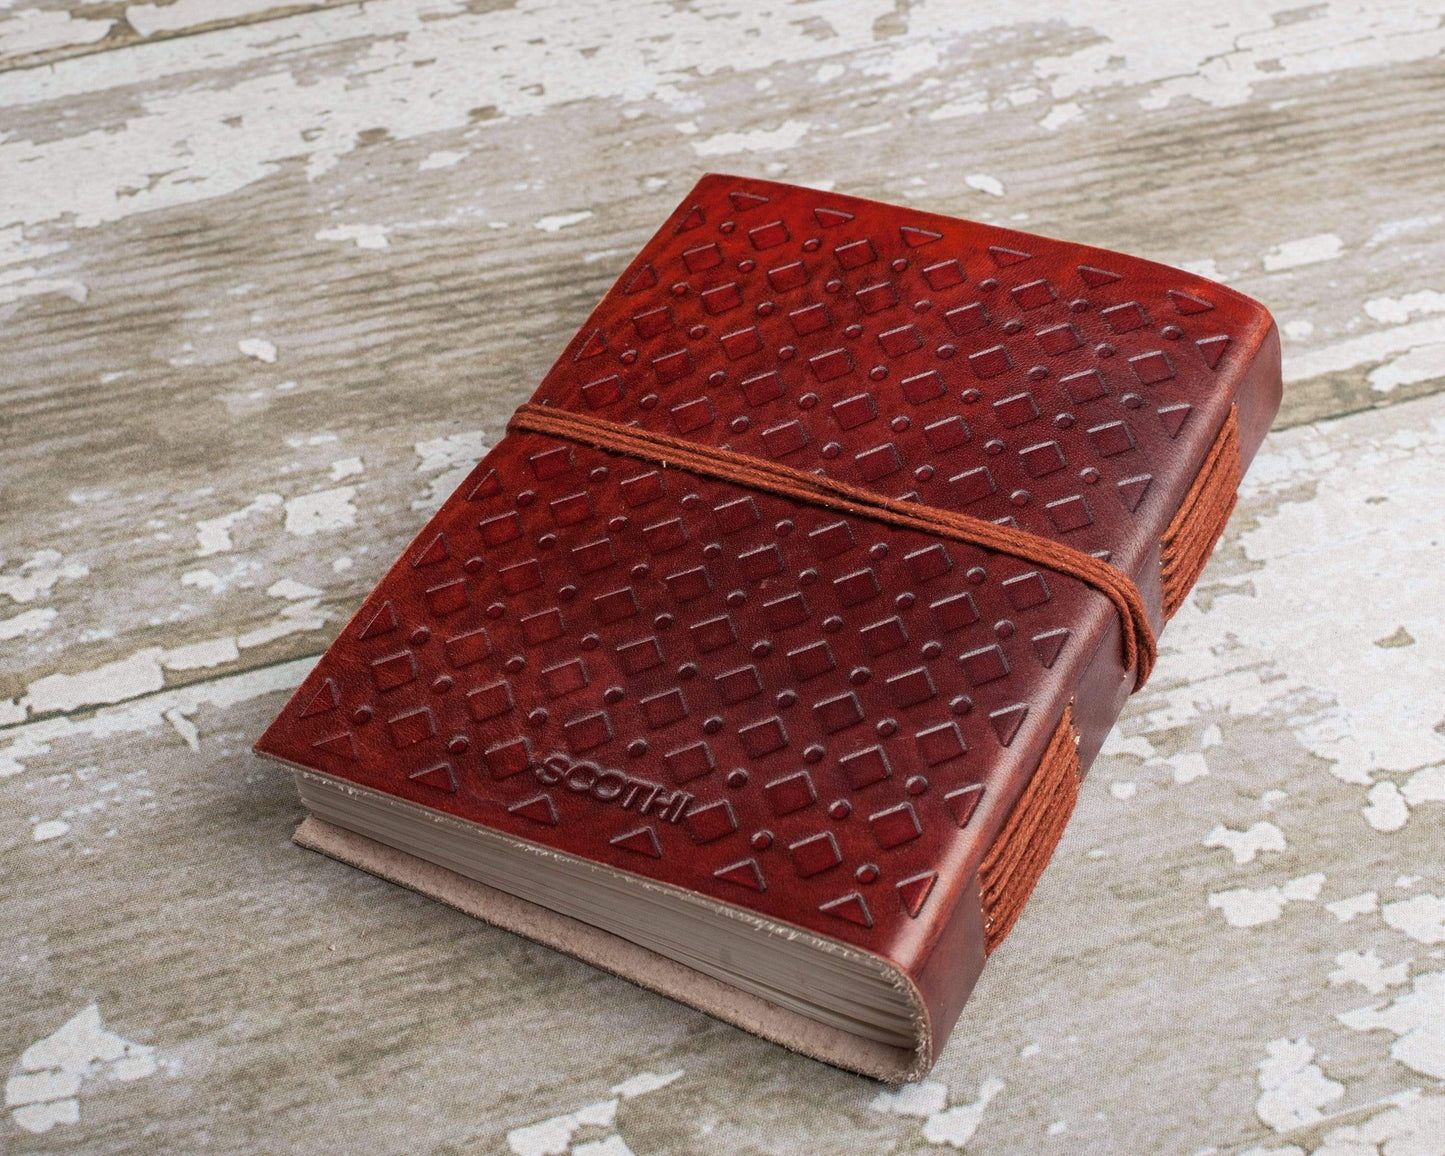 "We All Become Stories" Handmade Leather Journal - Leather Journals By Soothi